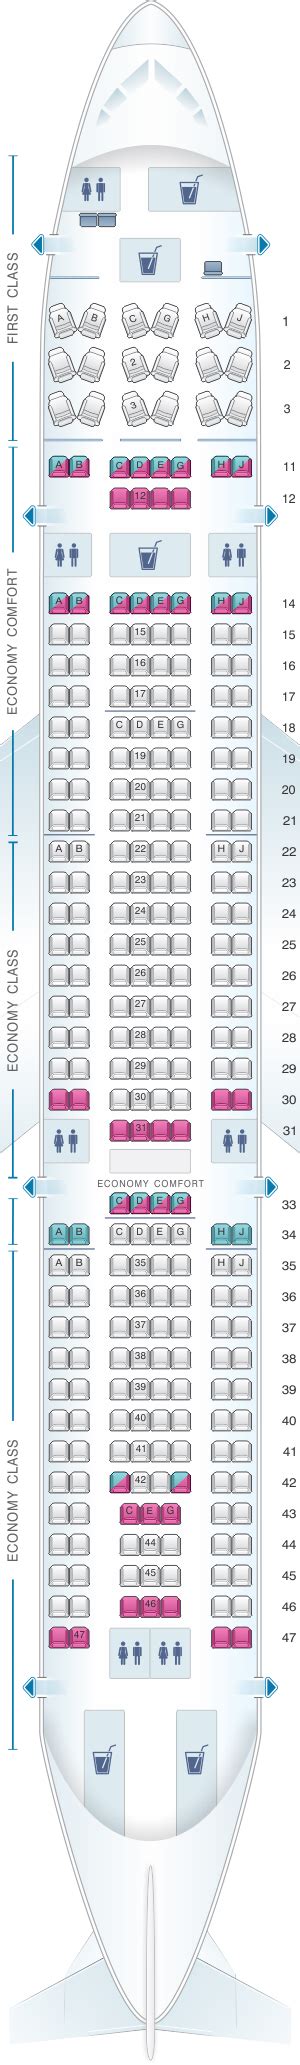 Hawaii Airlines Seating Chart Elcho Table